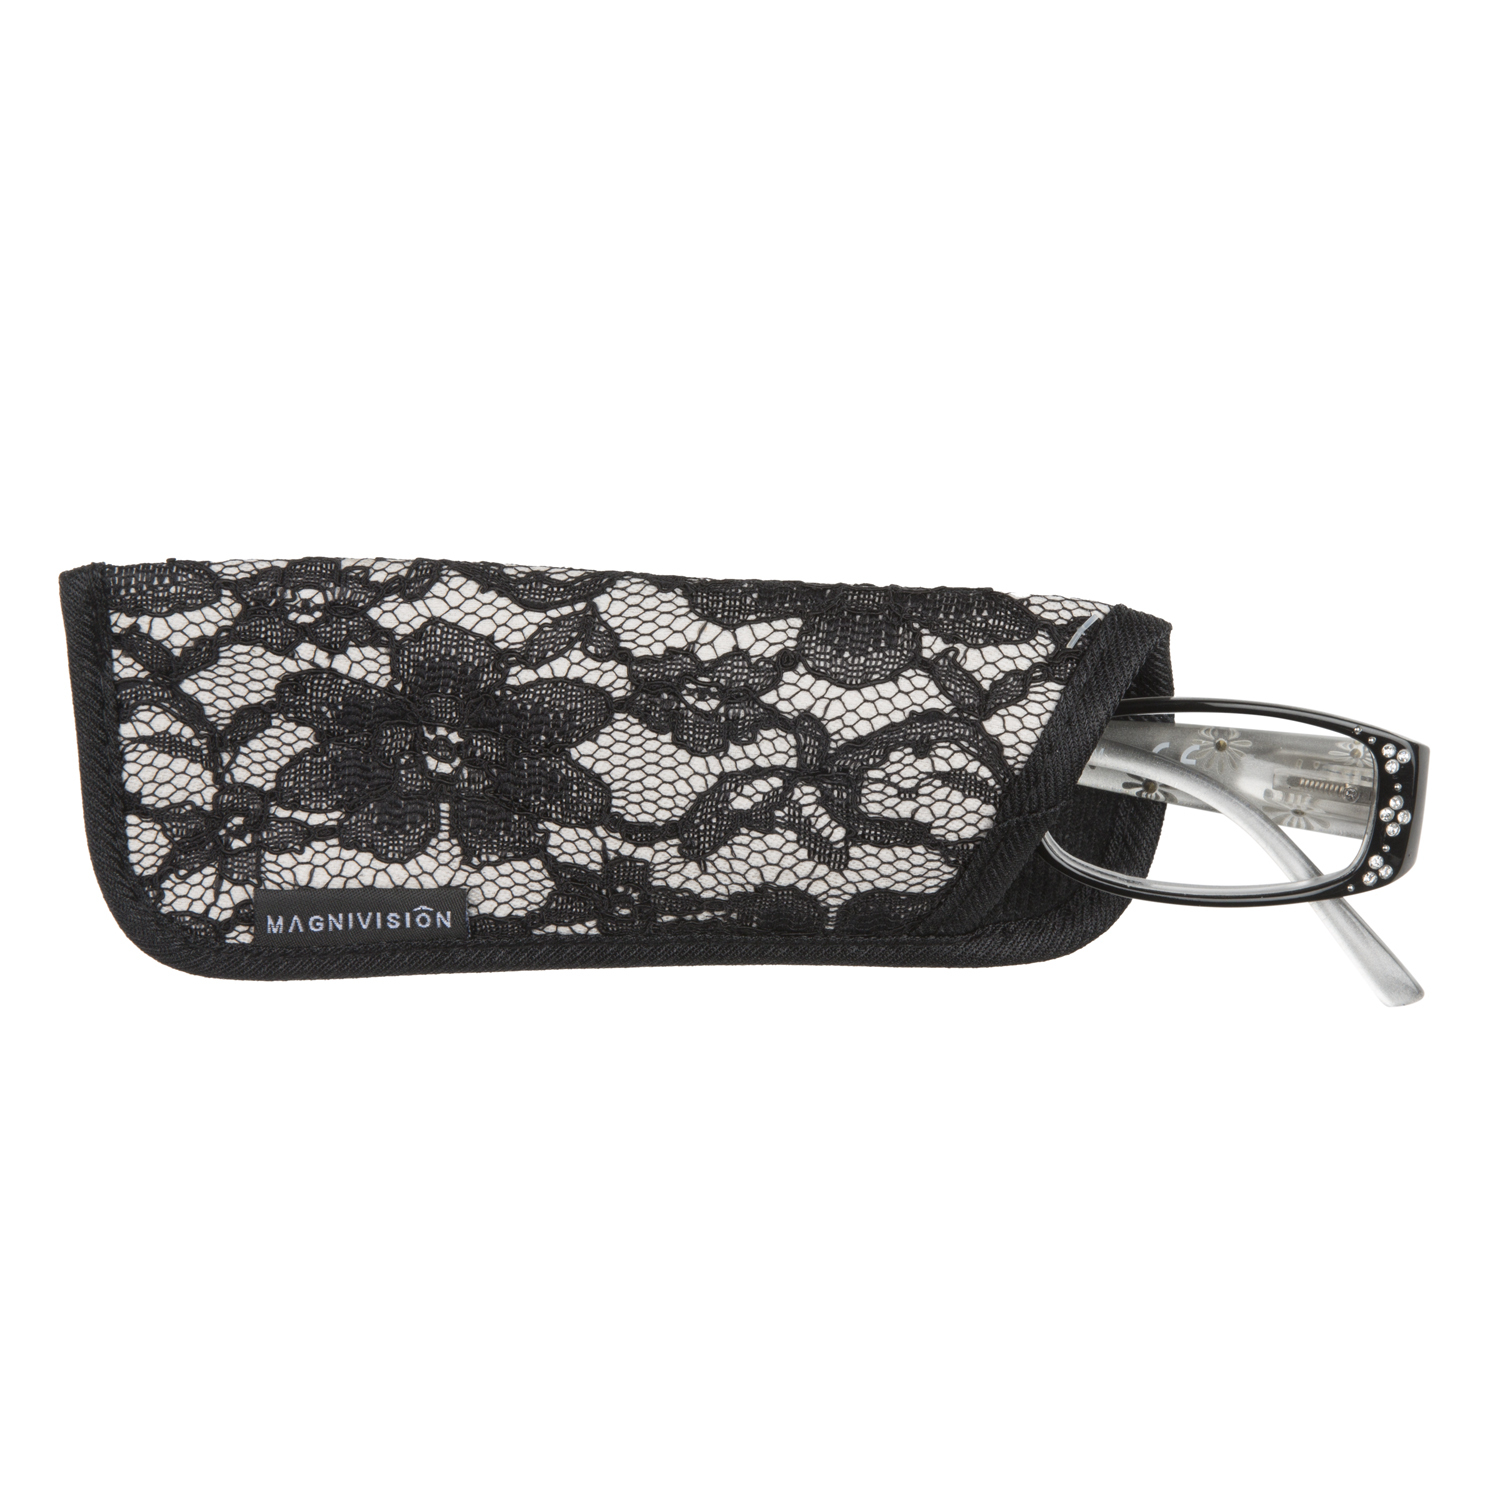 Tilly Magnivision Reading Glasses - 3.00 Image 3